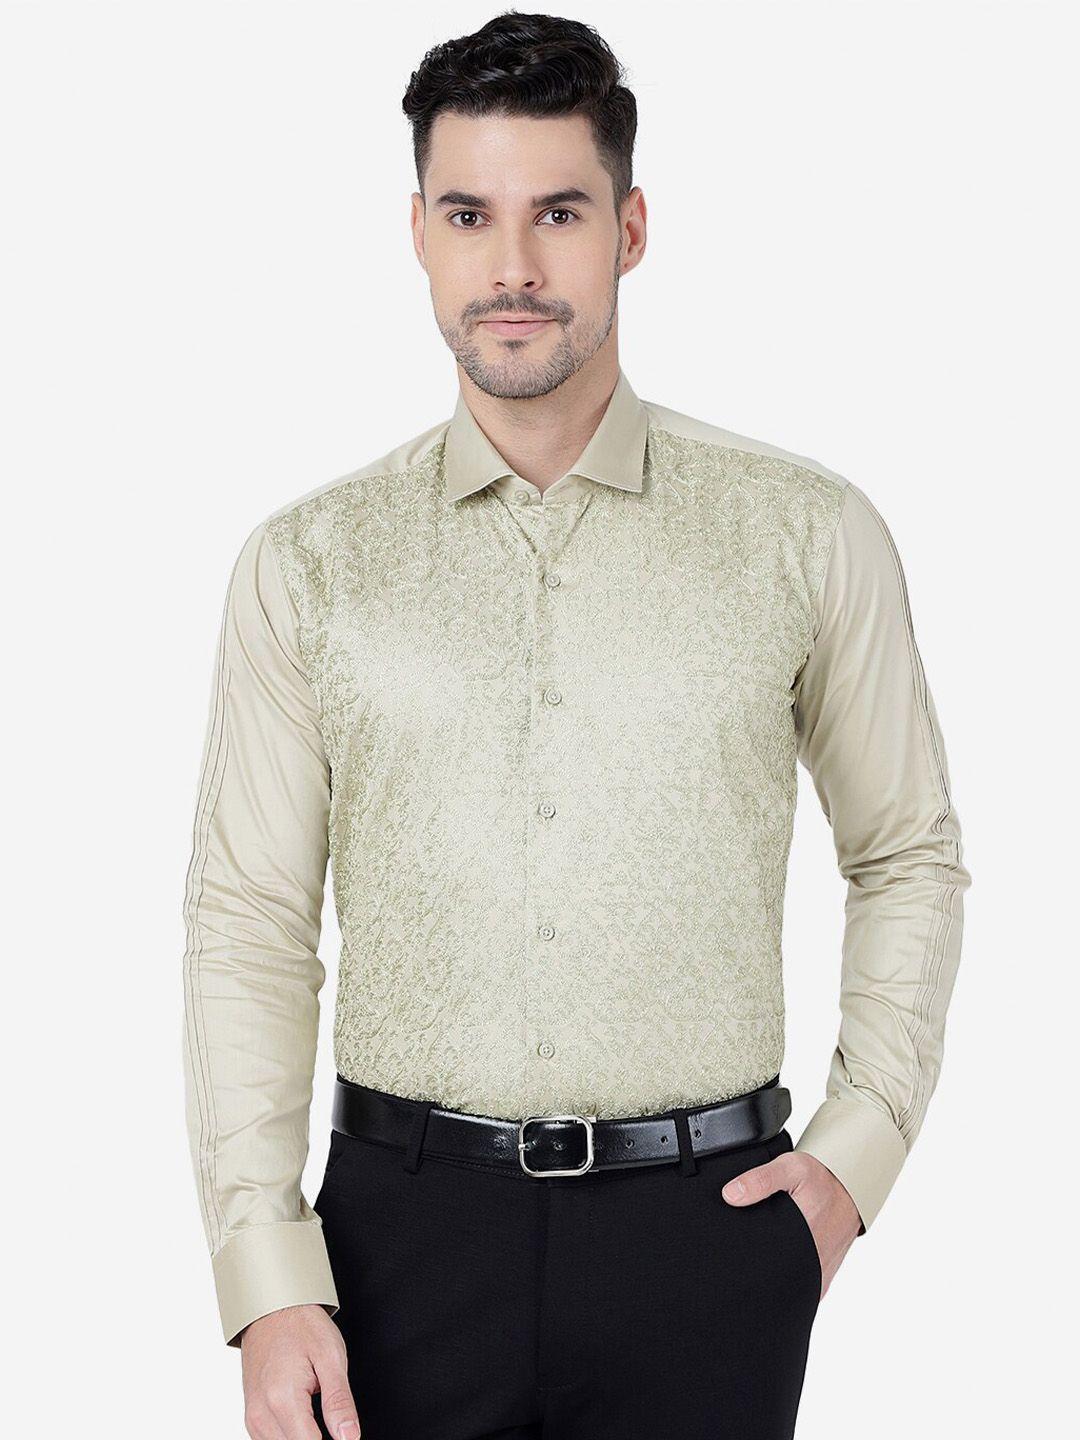 jb studio slim fit embroidered party shirt